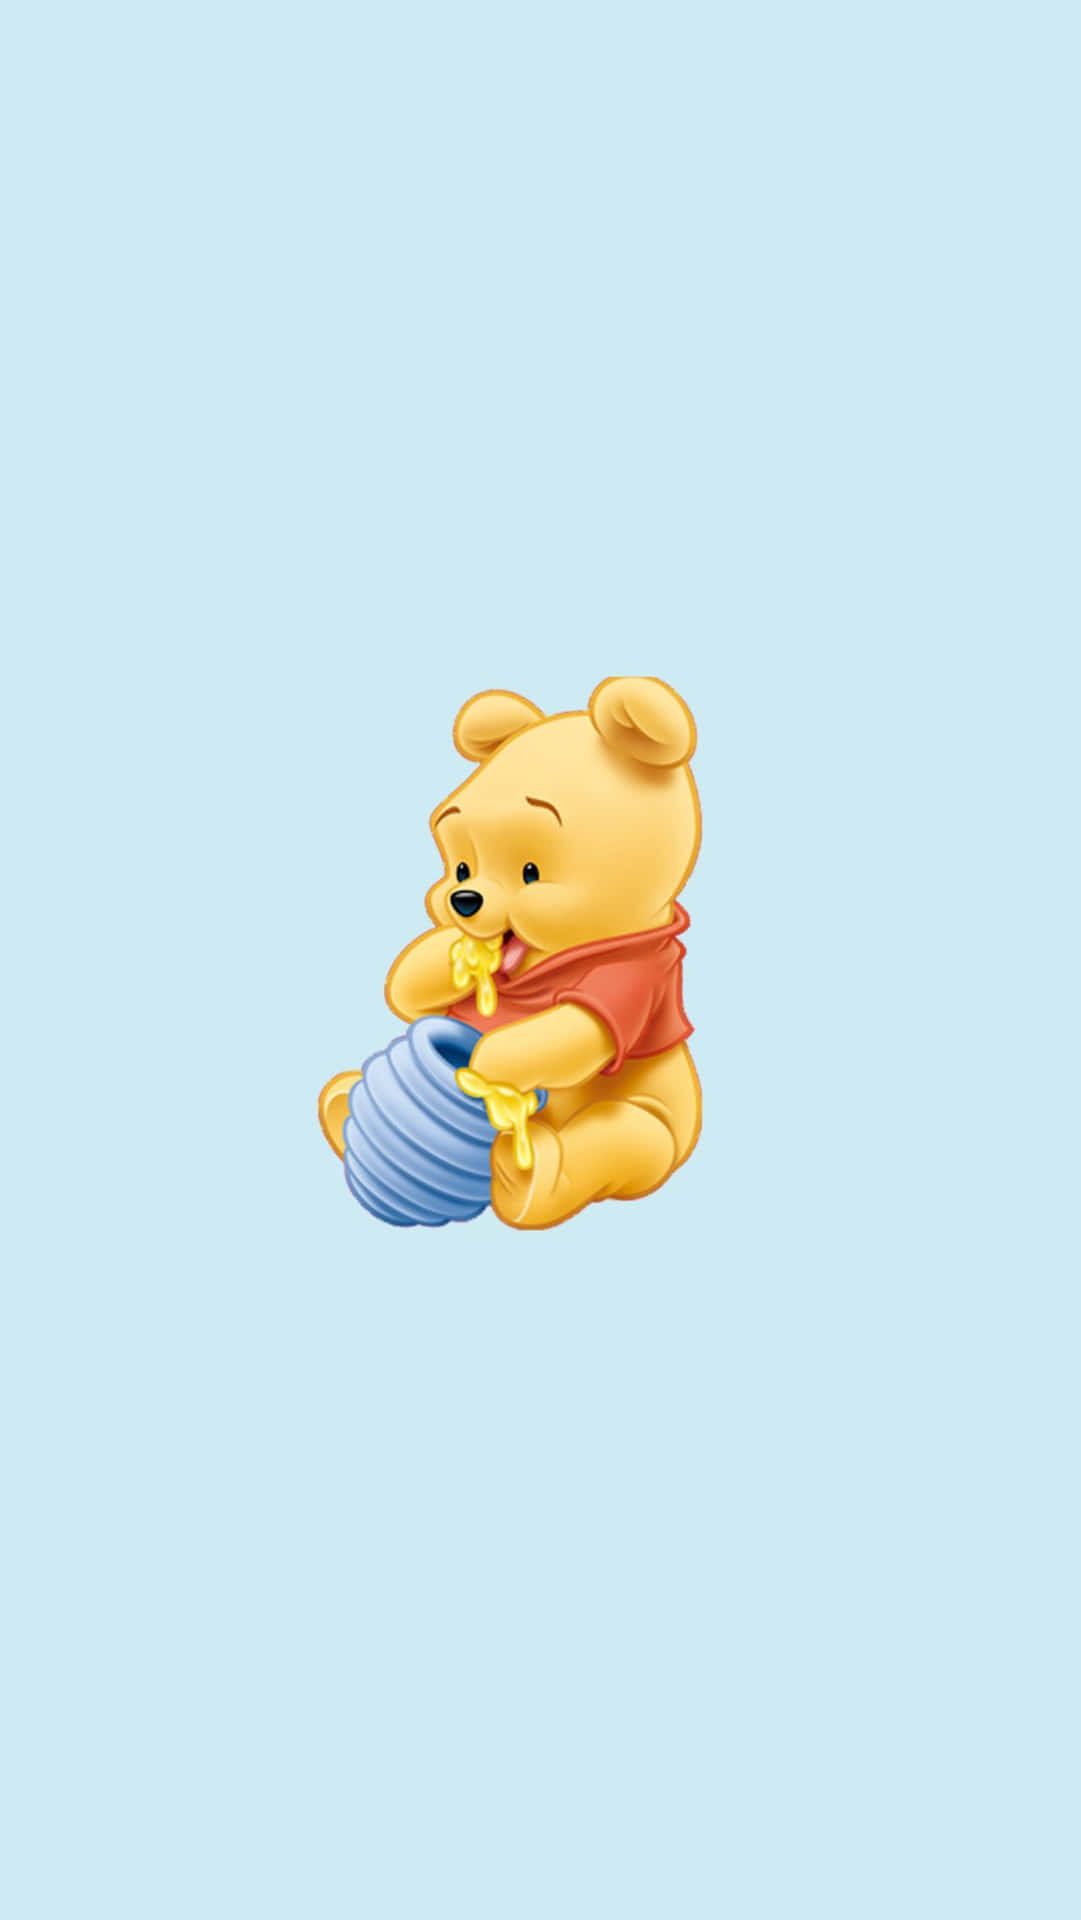 Enjoy Simple Pleasures with the Aesthetically Pleasing Winnie The Pooh Wallpaper